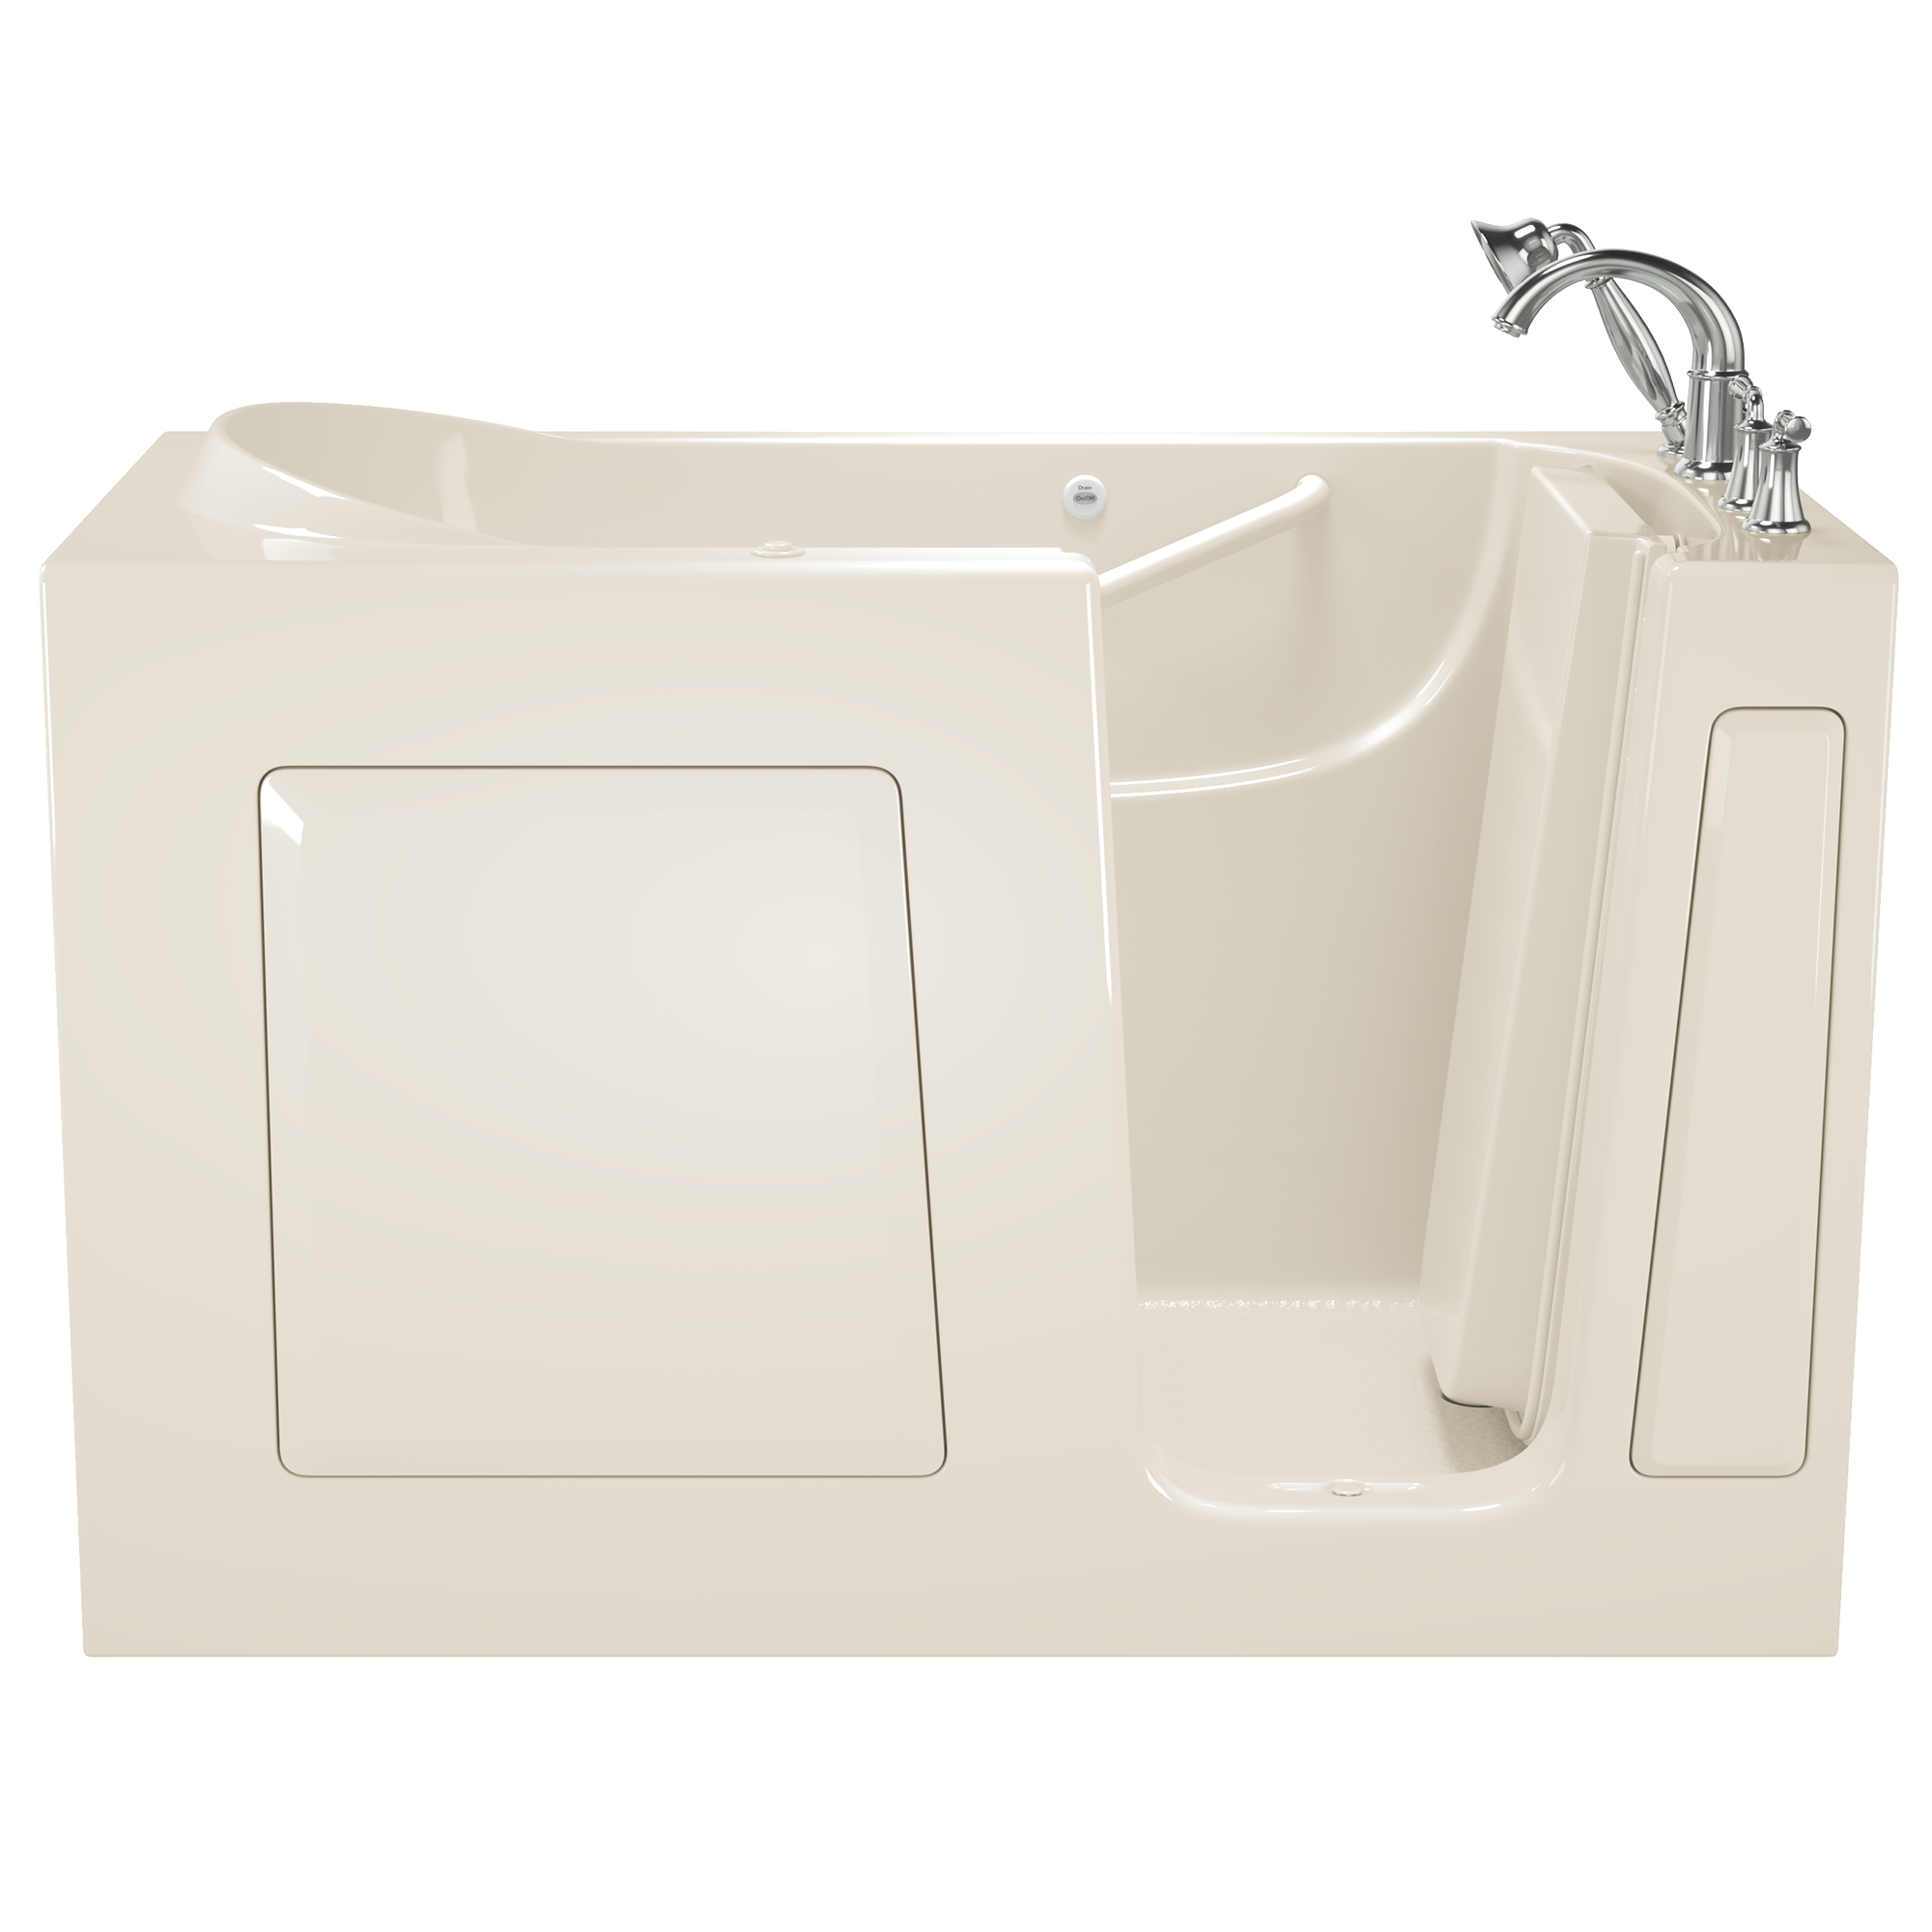 Gelcoat Value Series 30x60 Inch Walk In Bathtub with Air Spa System   Right Hand Door and Drain WIB LINEN